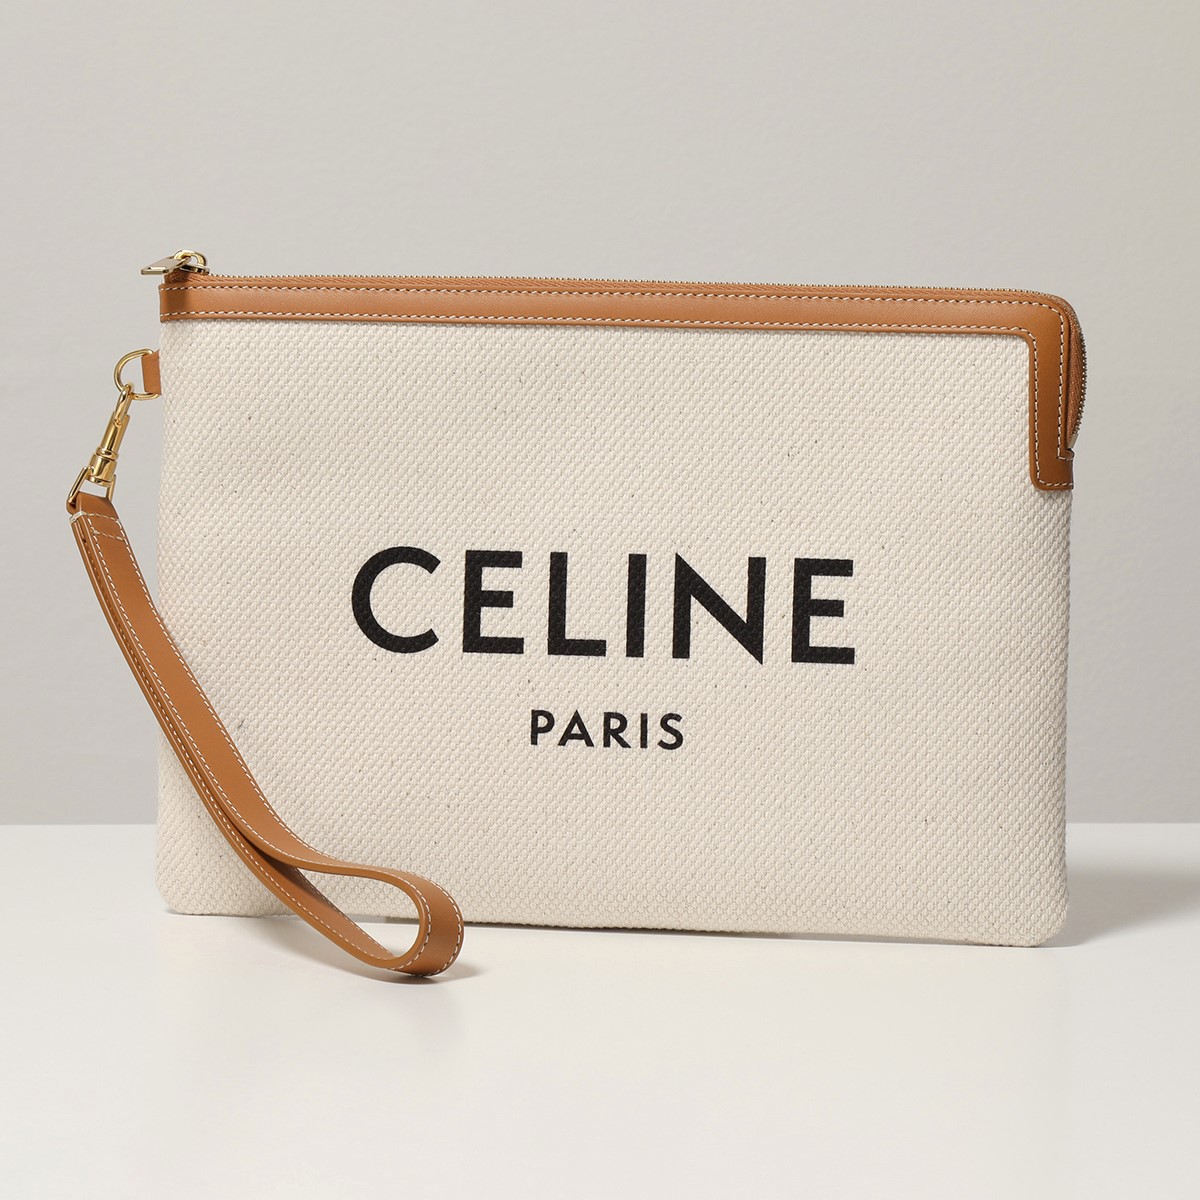 CELINE セリーヌ 10E632CO8.02VG Small Pouch with strap キャンバス×レザー クラッチバッグ ポーチ  リストレット付き 鞄 02VG/Natural レディース | インポートセレクト musee